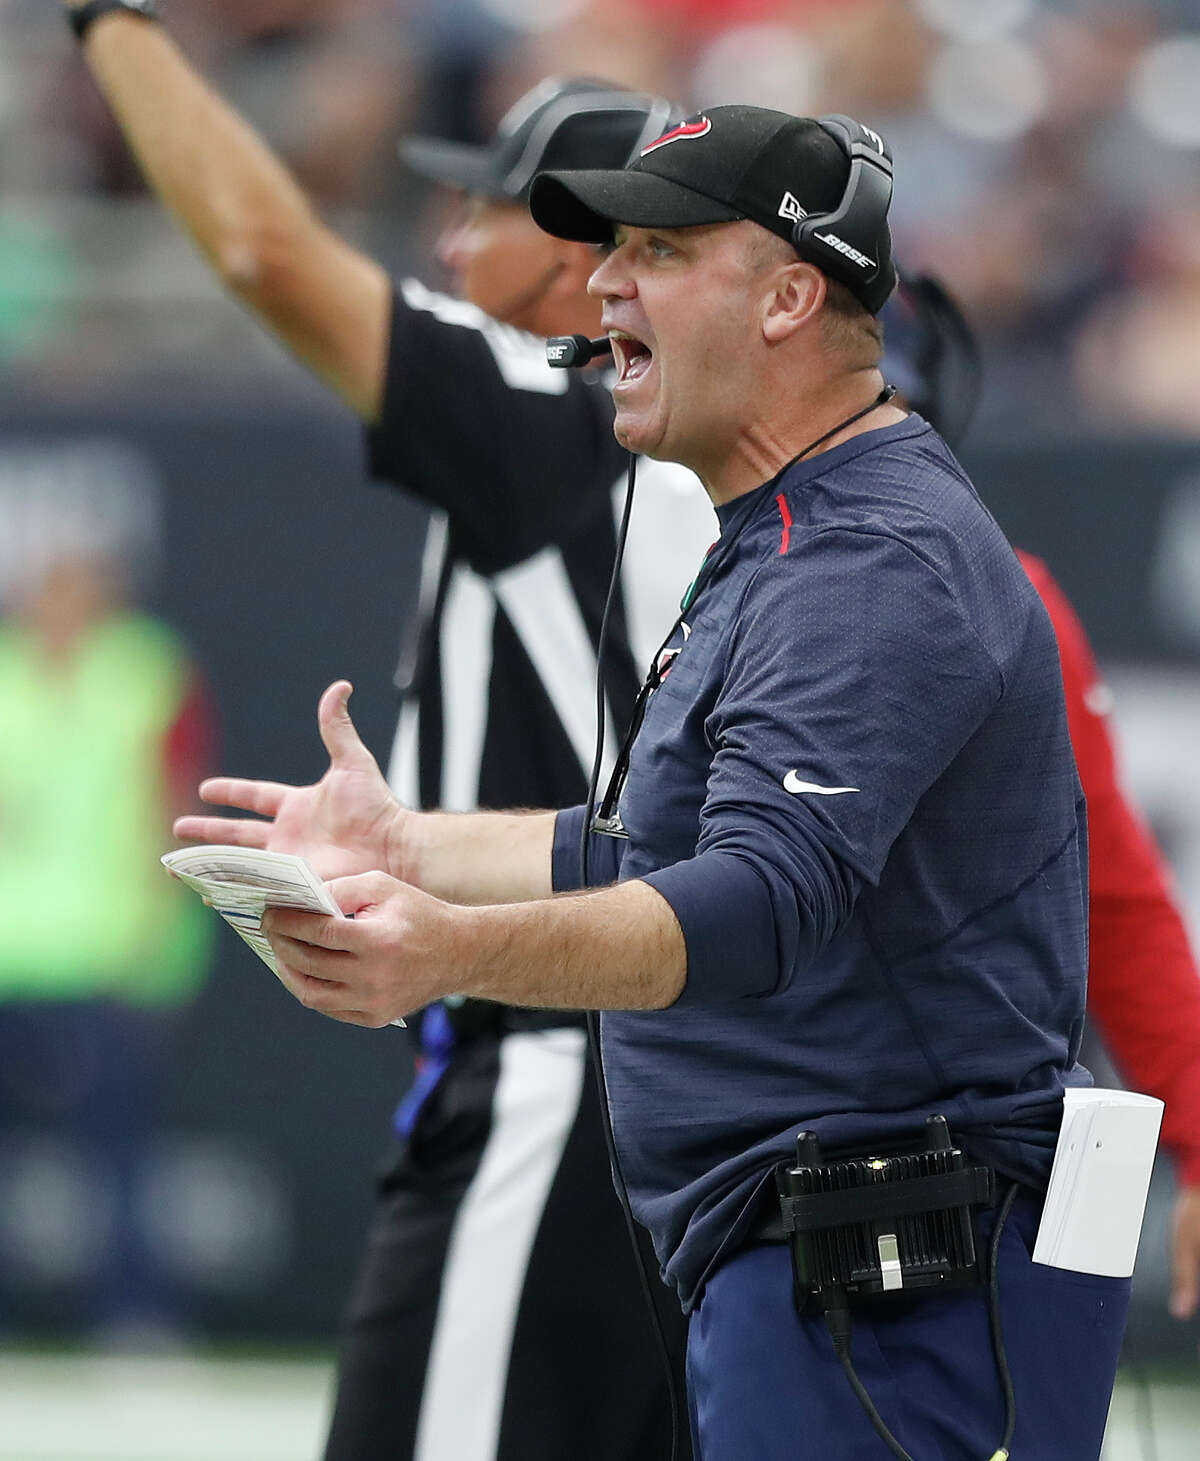 Houston Texans head coach Bill O'Brien argues after a play during the second quarter of an NFL football game at NRG Stadium, Sunday, Oct. 1, 2017, in Houston.